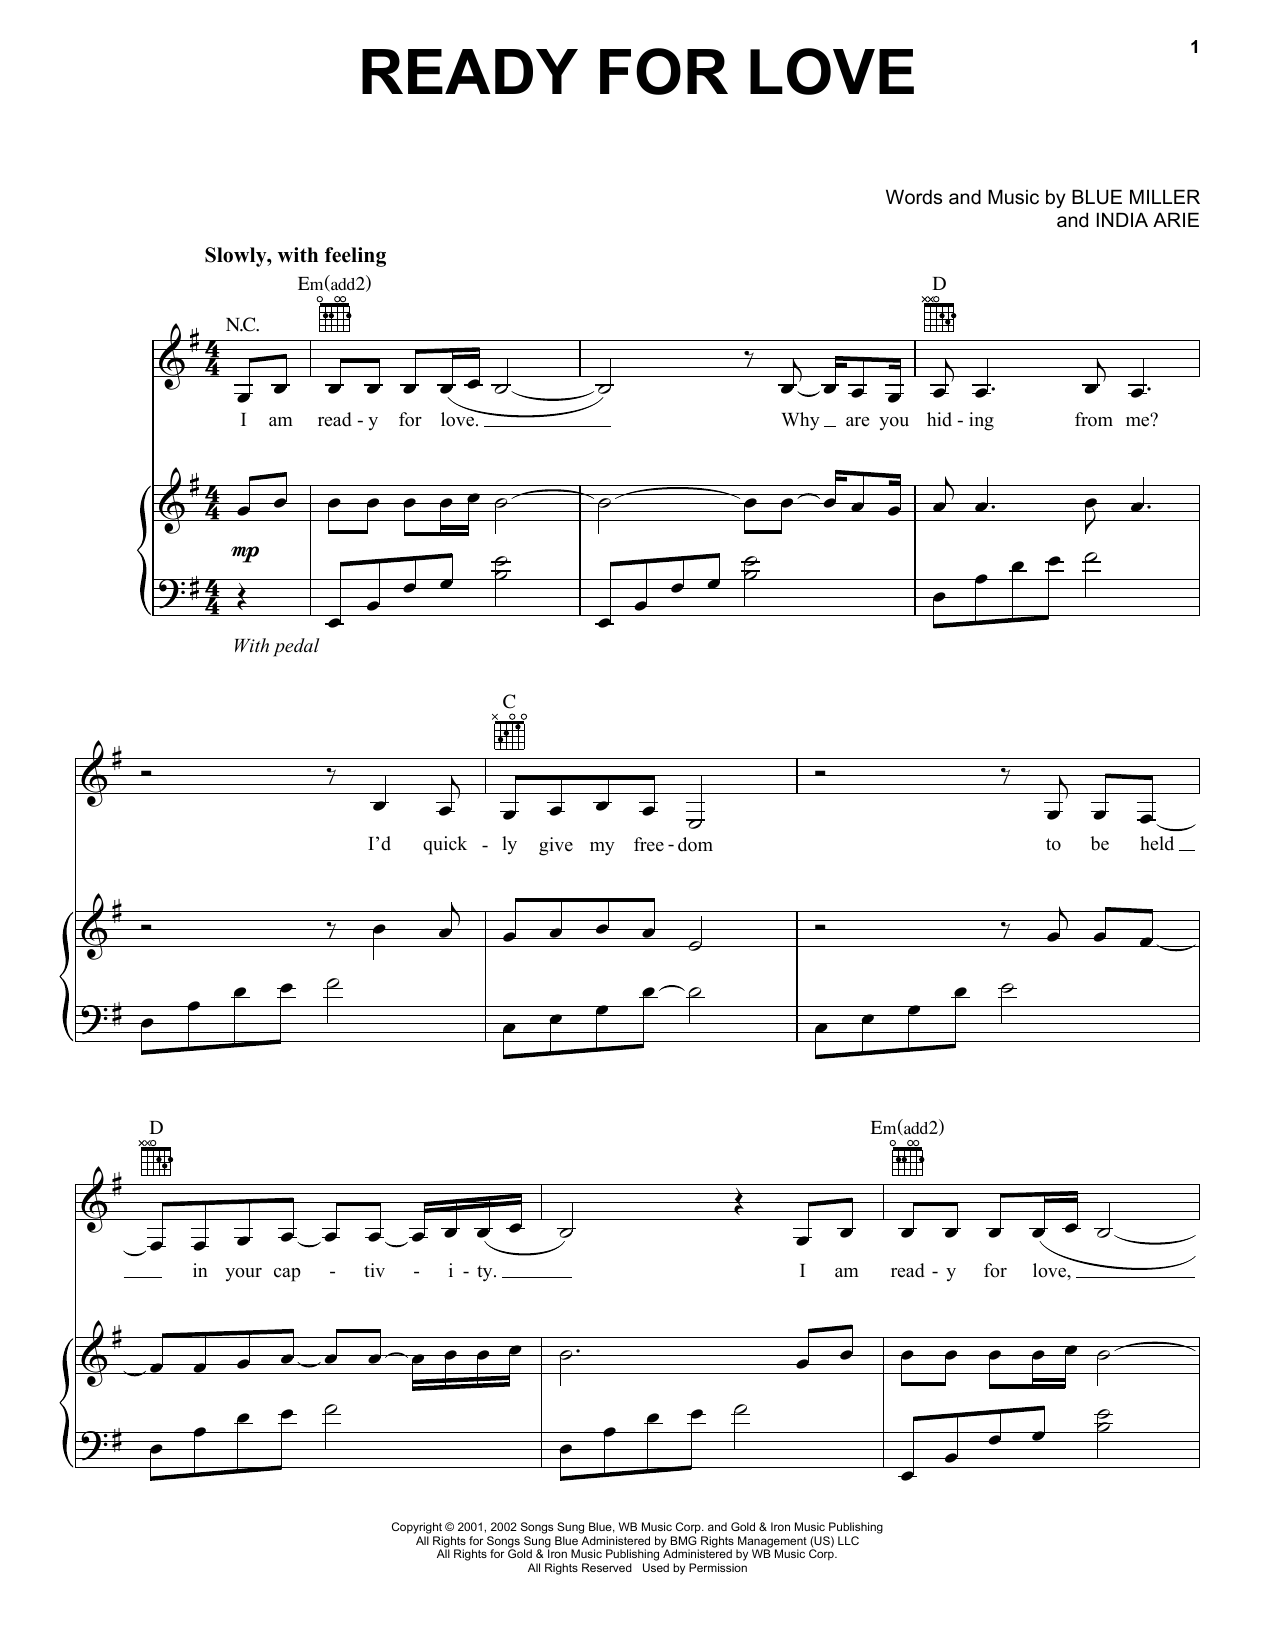 Download India Arie Ready For Love Sheet Music